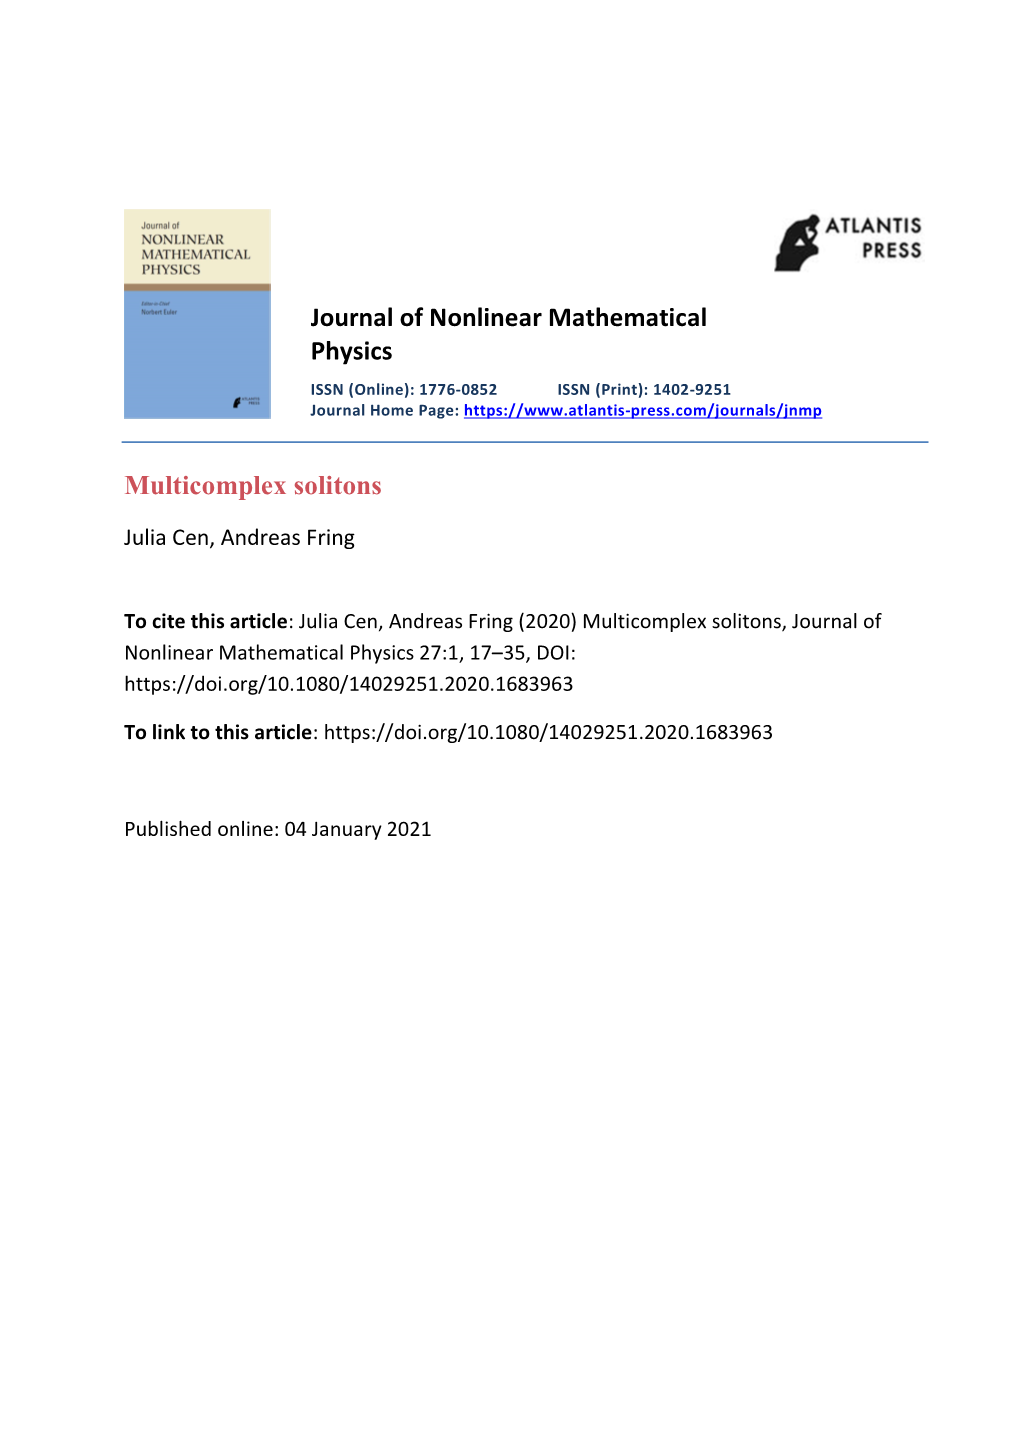 Journal of Nonlinear Mathematical Physics Multicomplex Solitons